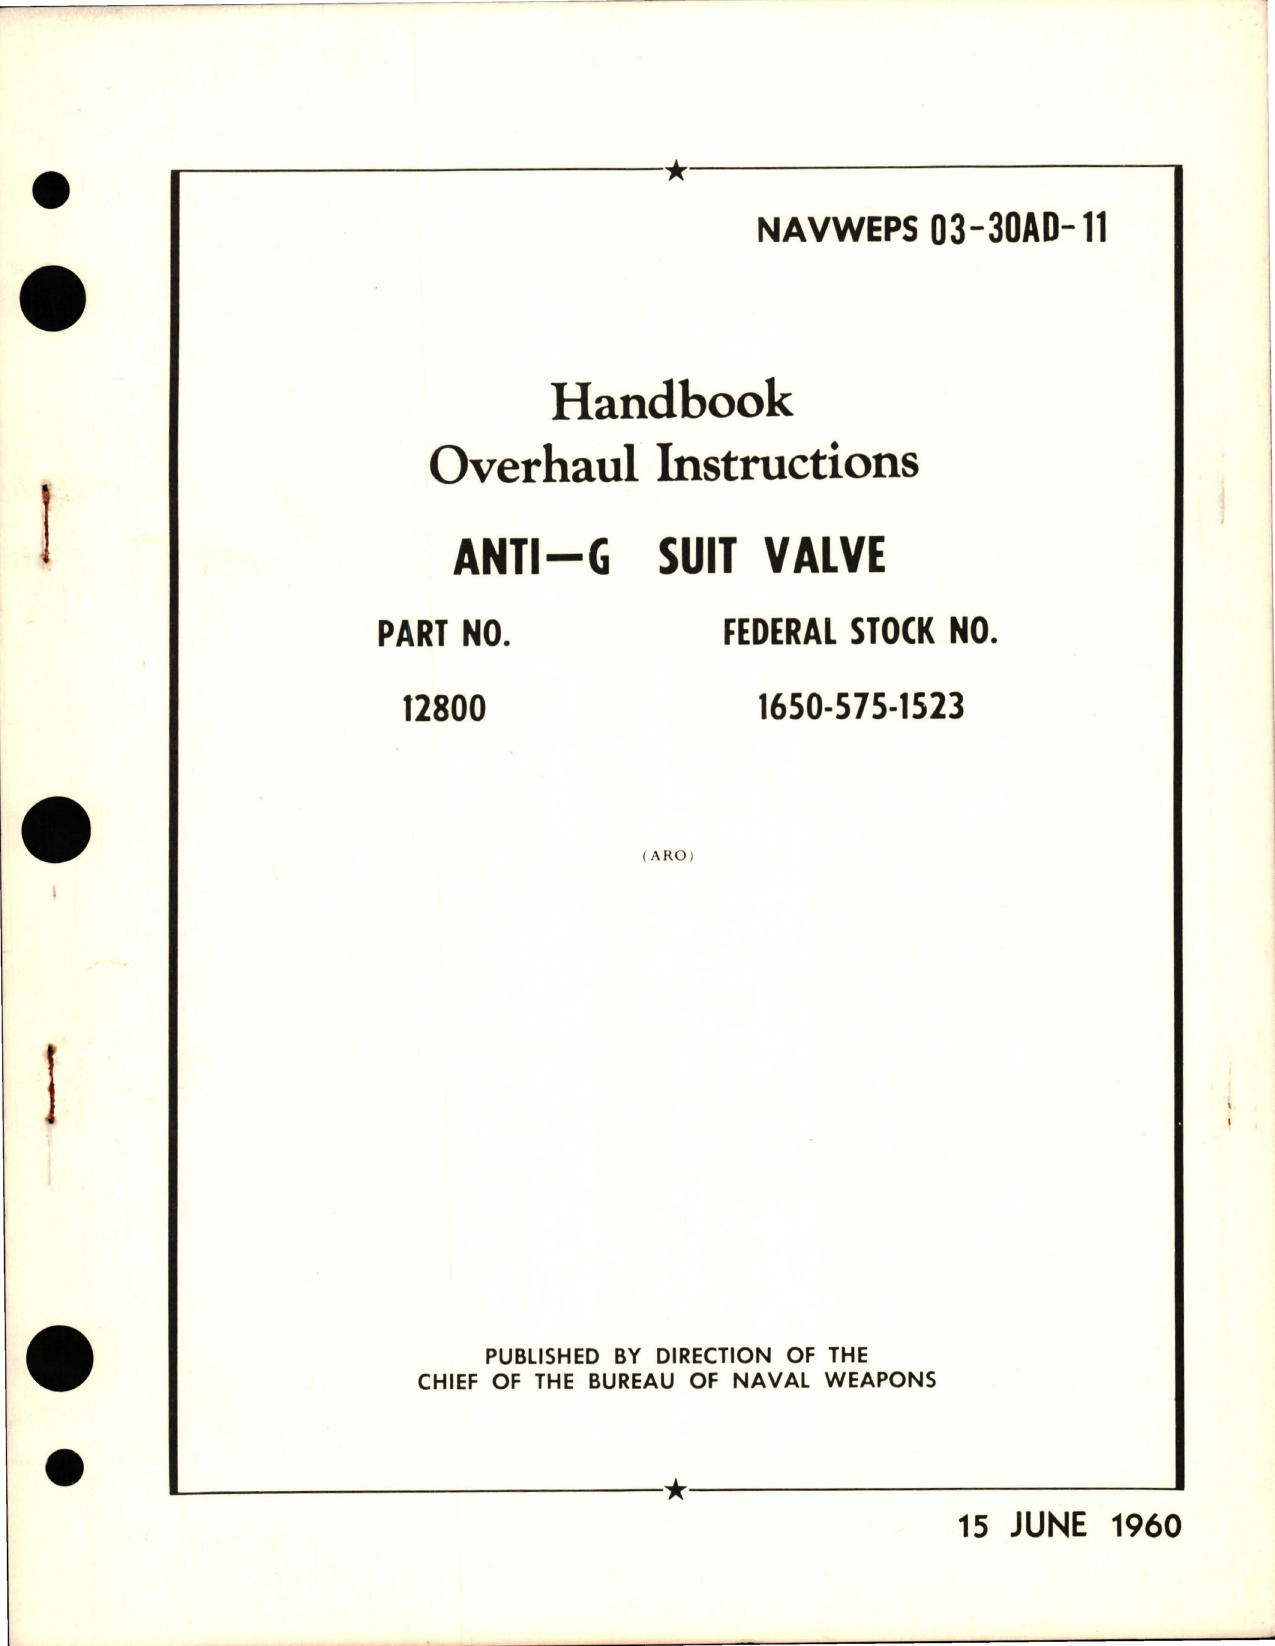 Sample page 1 from AirCorps Library document: Overhaul Instructions for Anti-G Suit Valve - Part 12800 